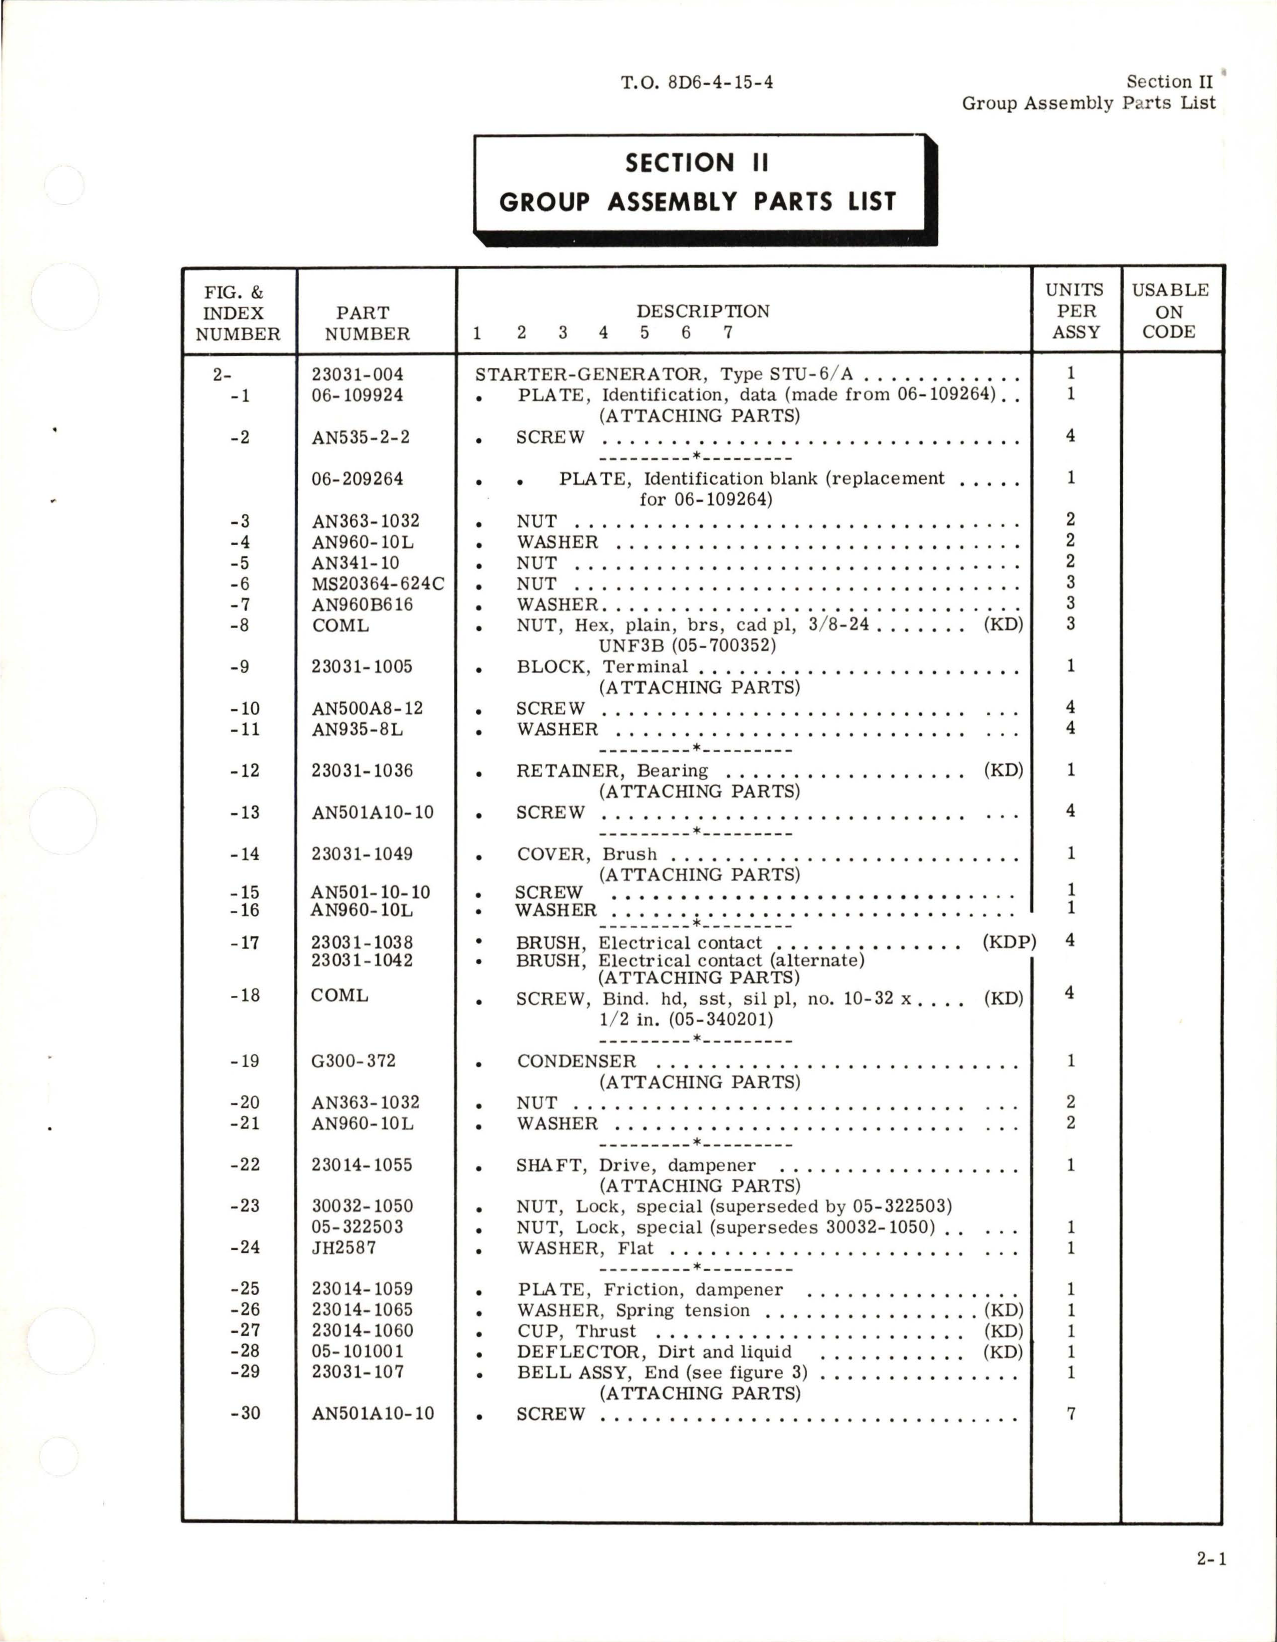 Sample page 7 from AirCorps Library document: Illustrated Parts Breakdown for Starter Generator - Type STU-6-A - Model 23031-004 